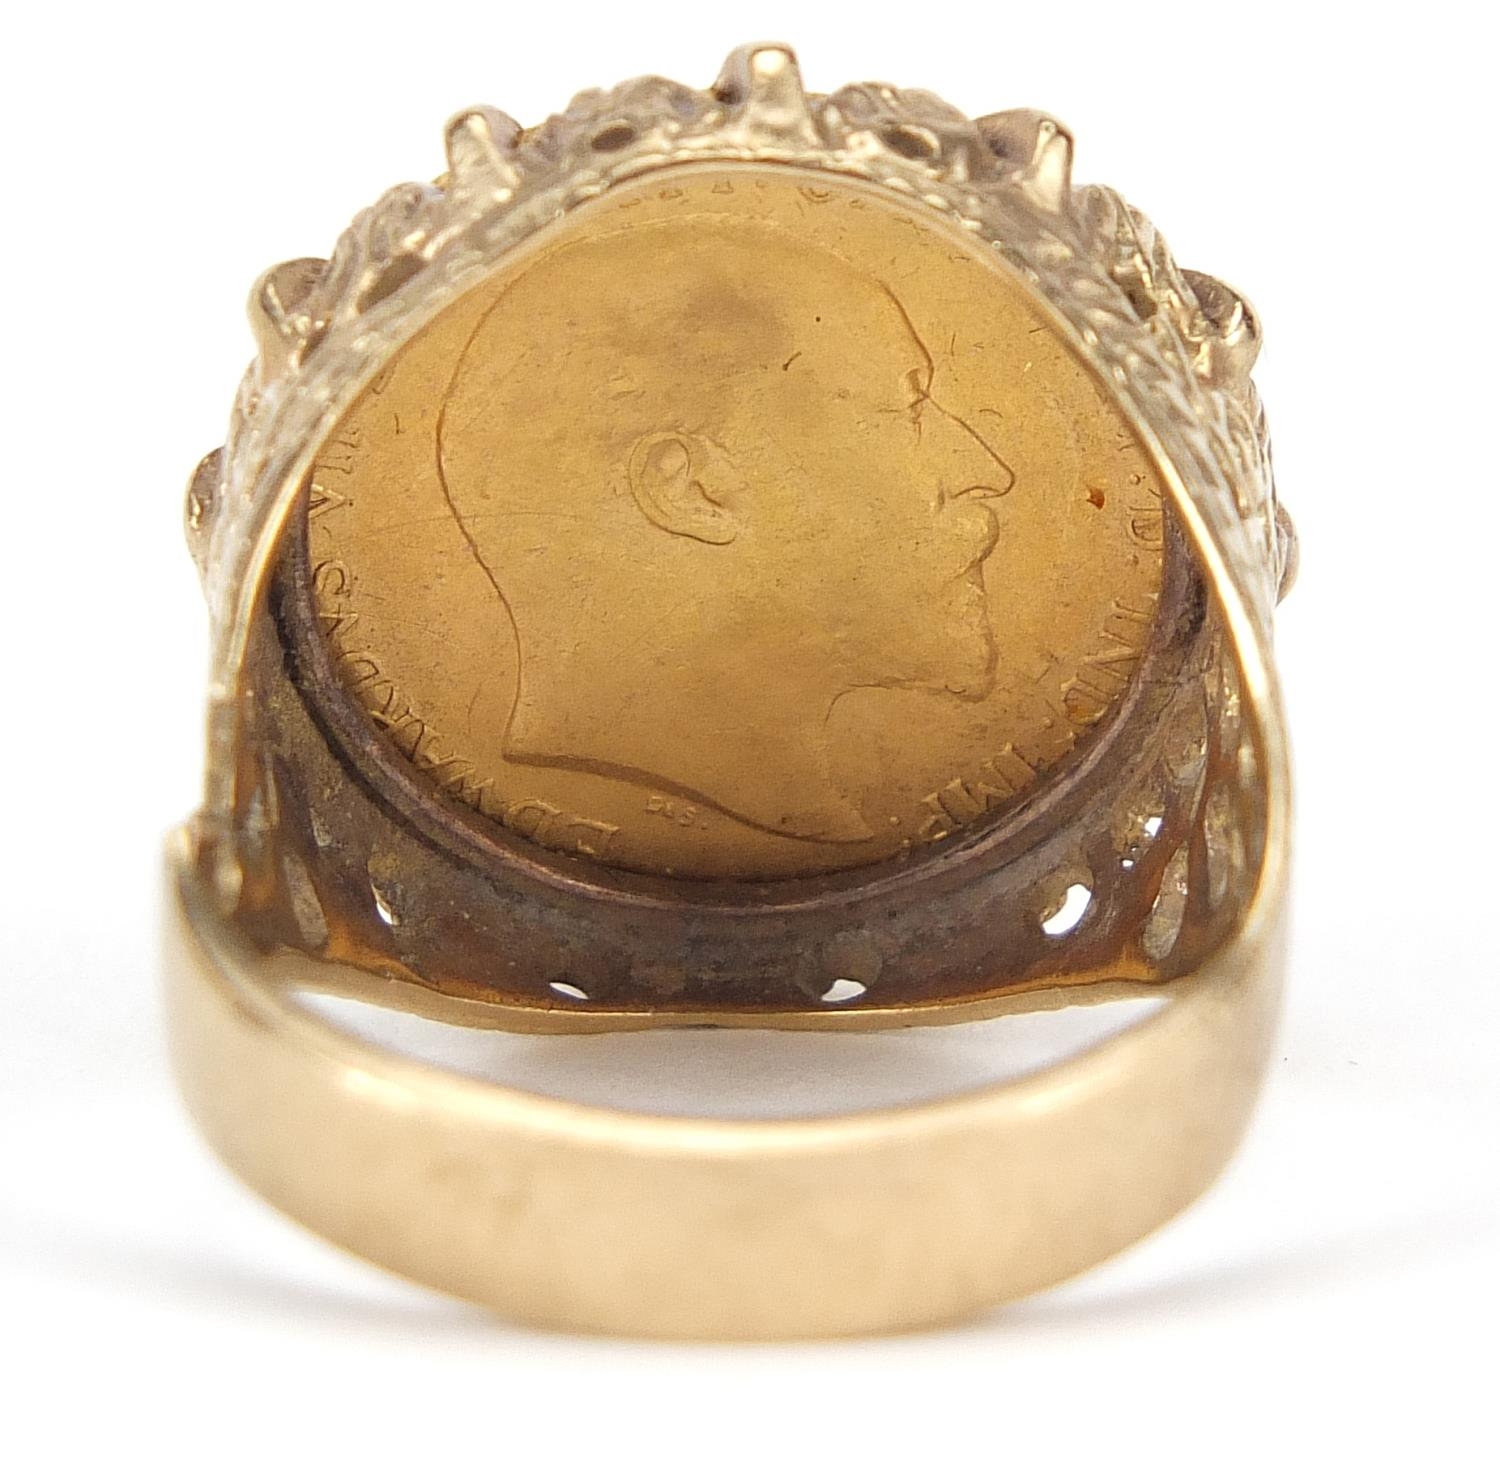 Edward VII 1906 gold half sovereign with 9ct gold ring mount, size S, 9.7g - this lot is sold - Image 6 of 6